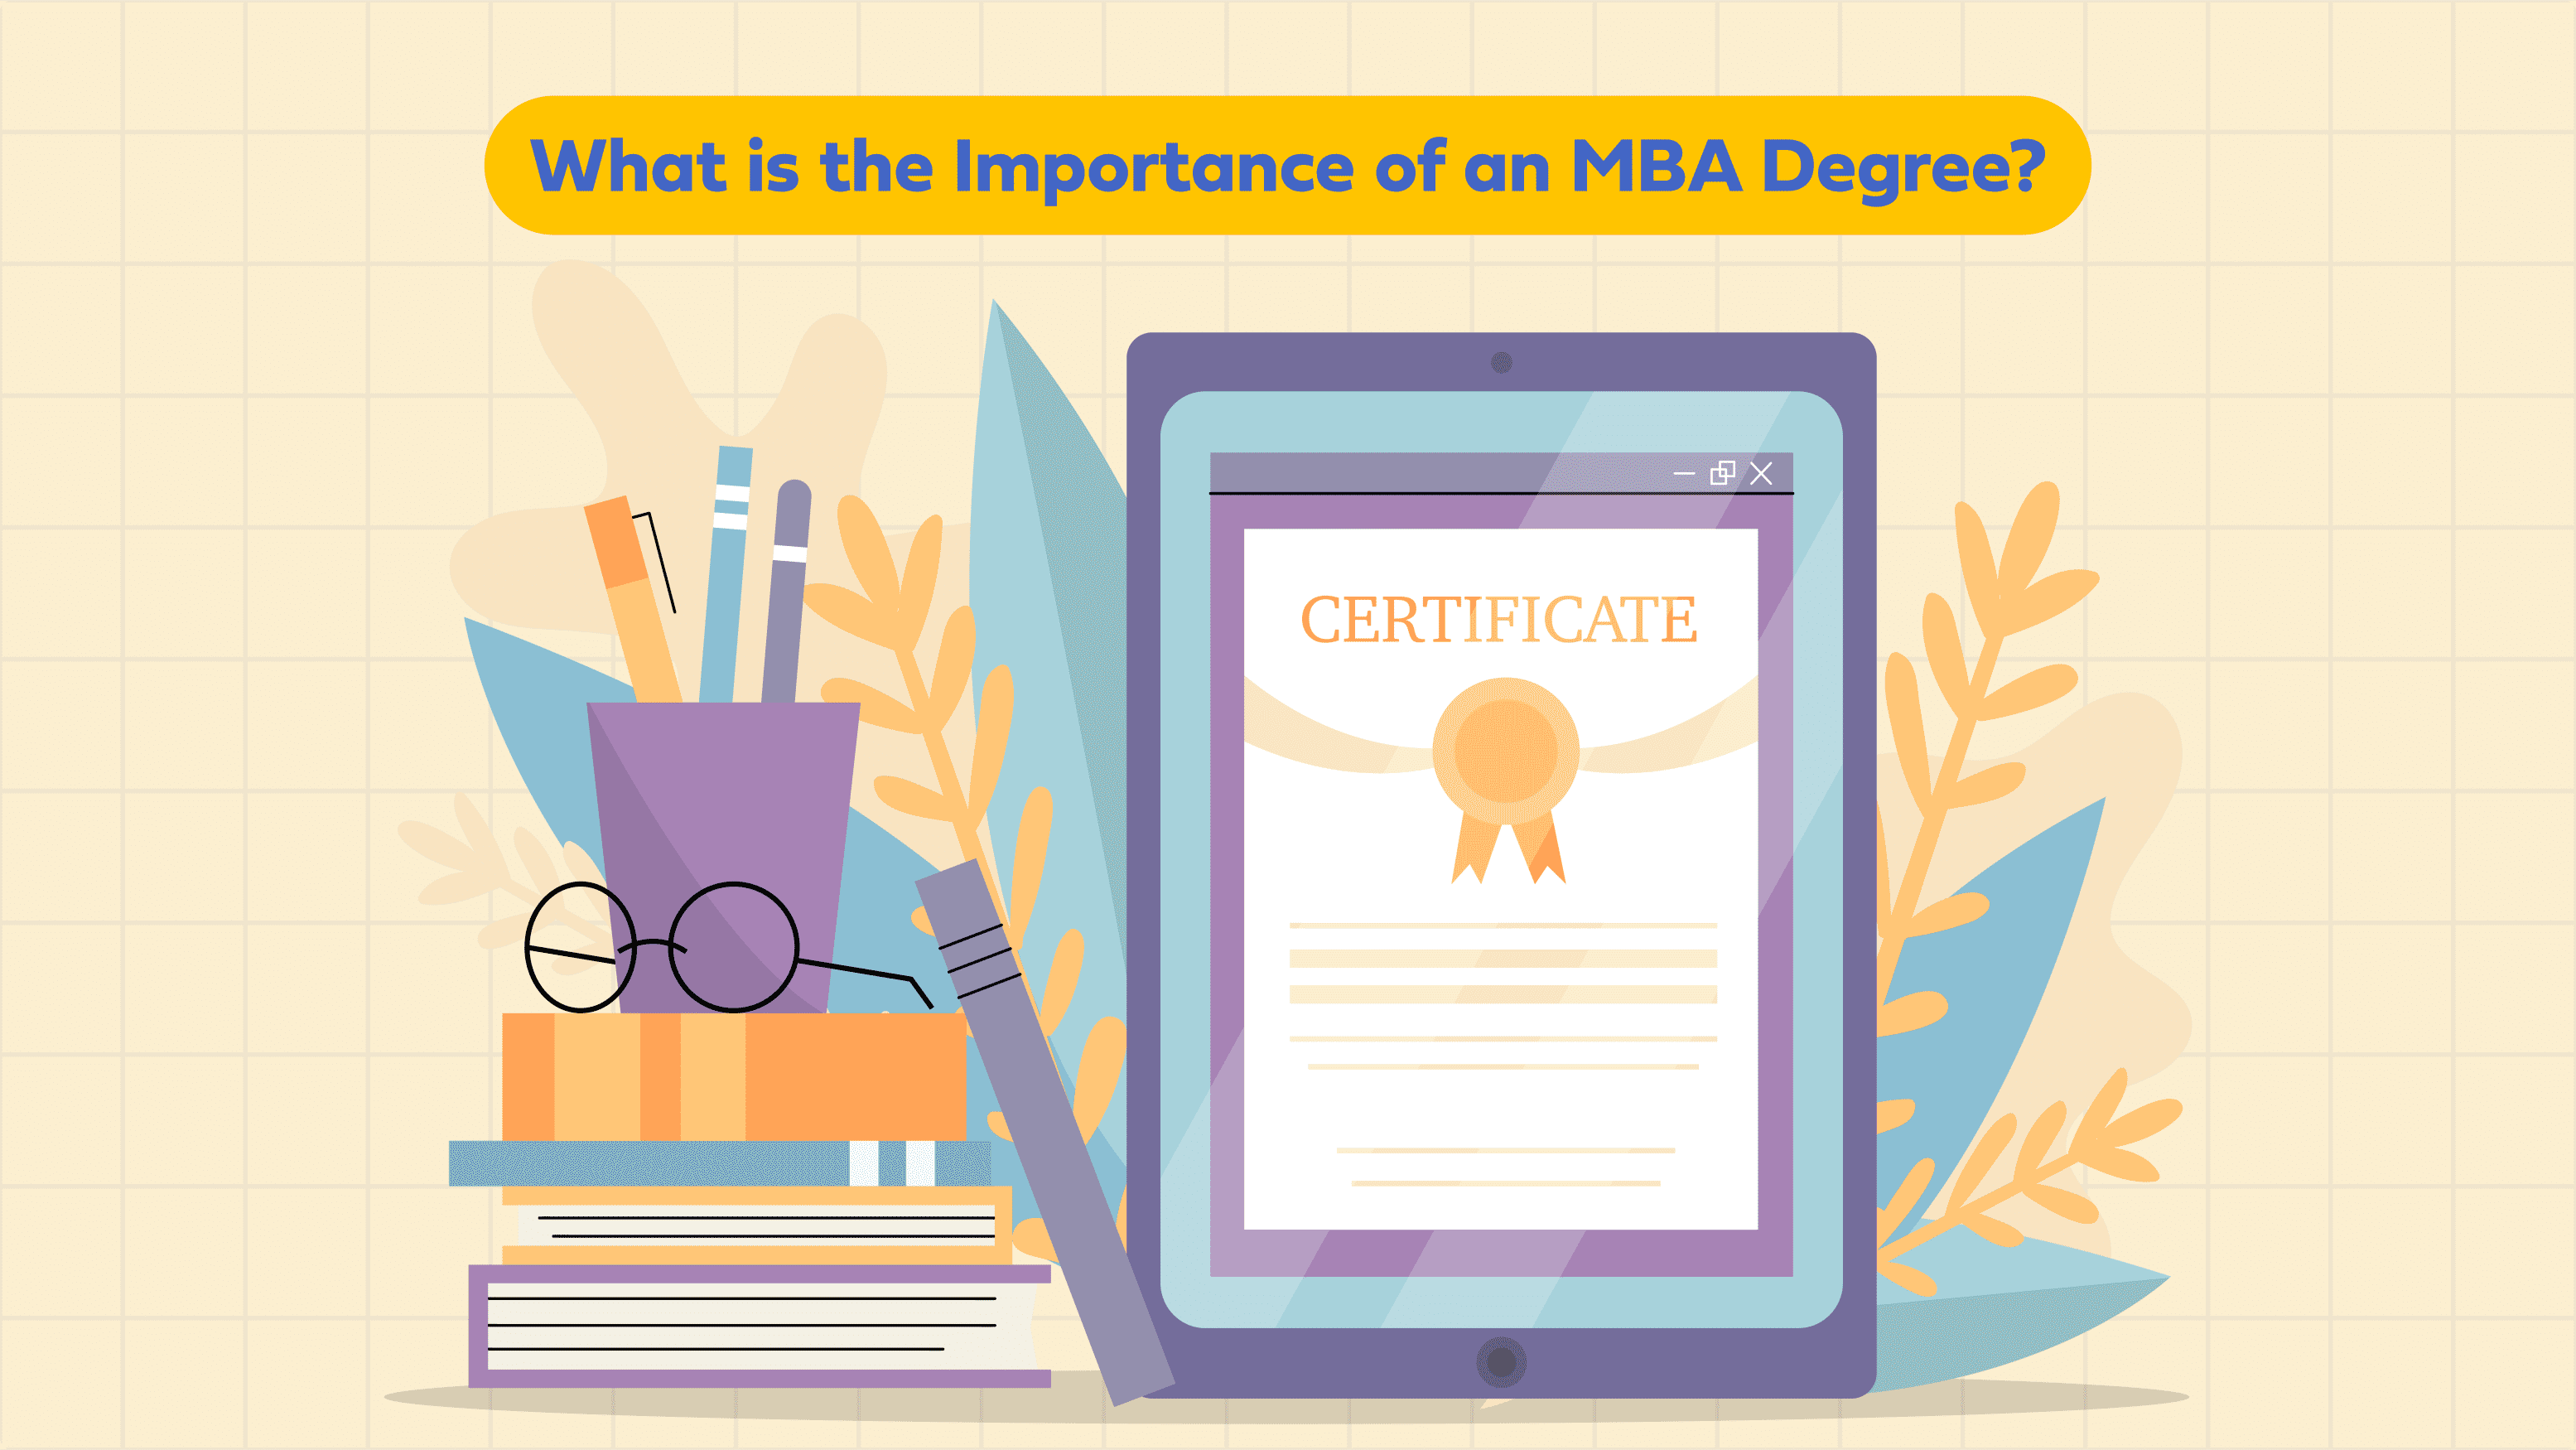 What is the Importance of an MBA Degree?